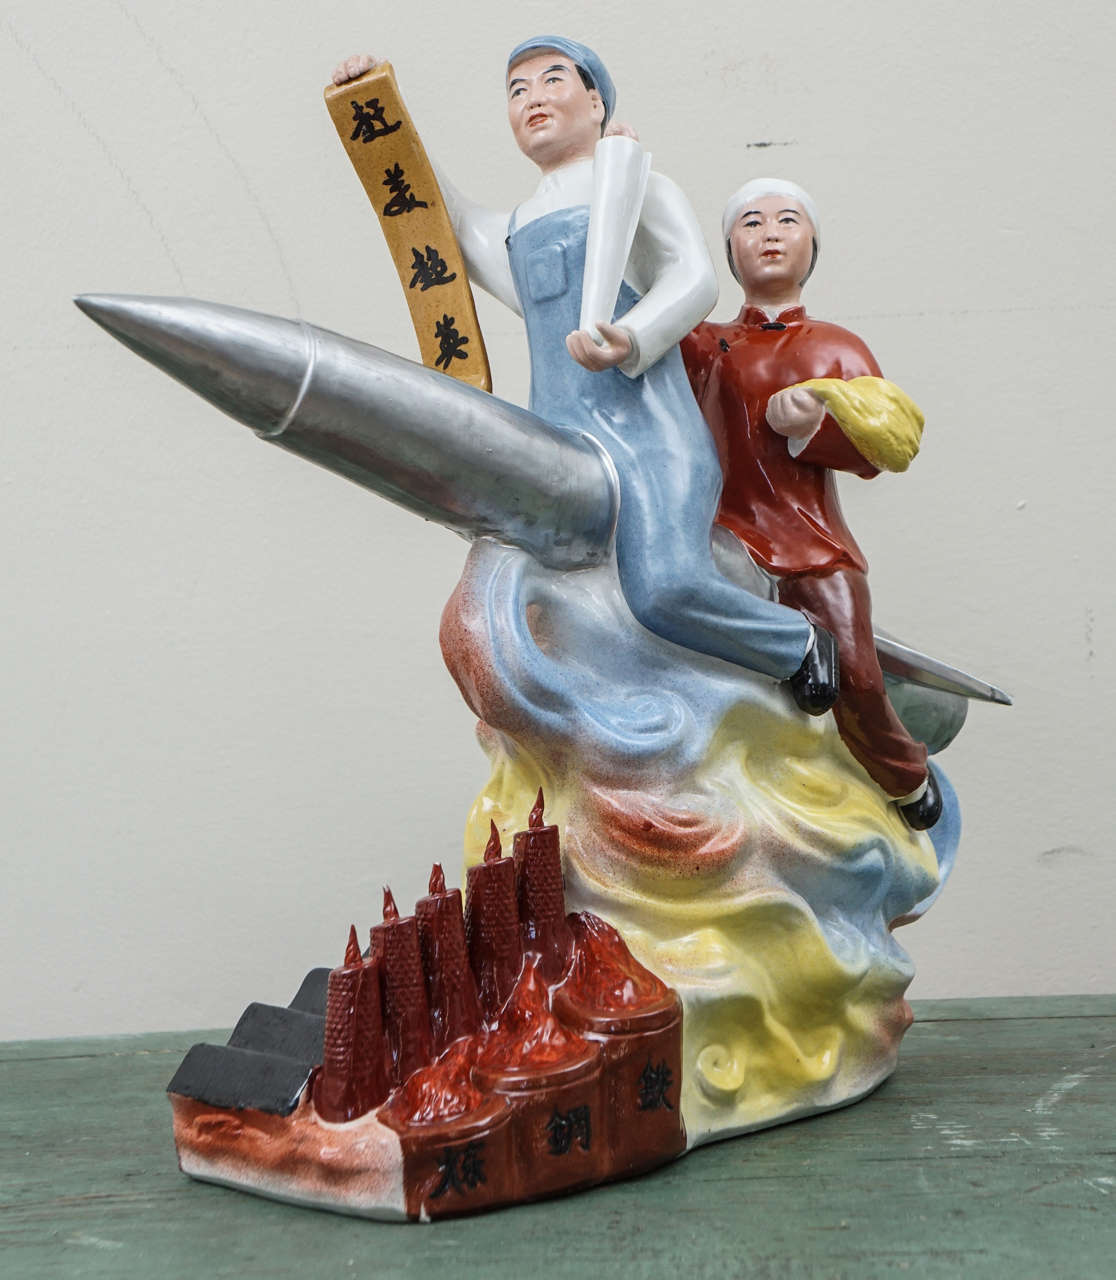 This Bold and Beautifully Colored Ceramic Shows an Enthusiastic Chinese Couple Aboard a Missile.  The Banner  (loosely translated) Reads  